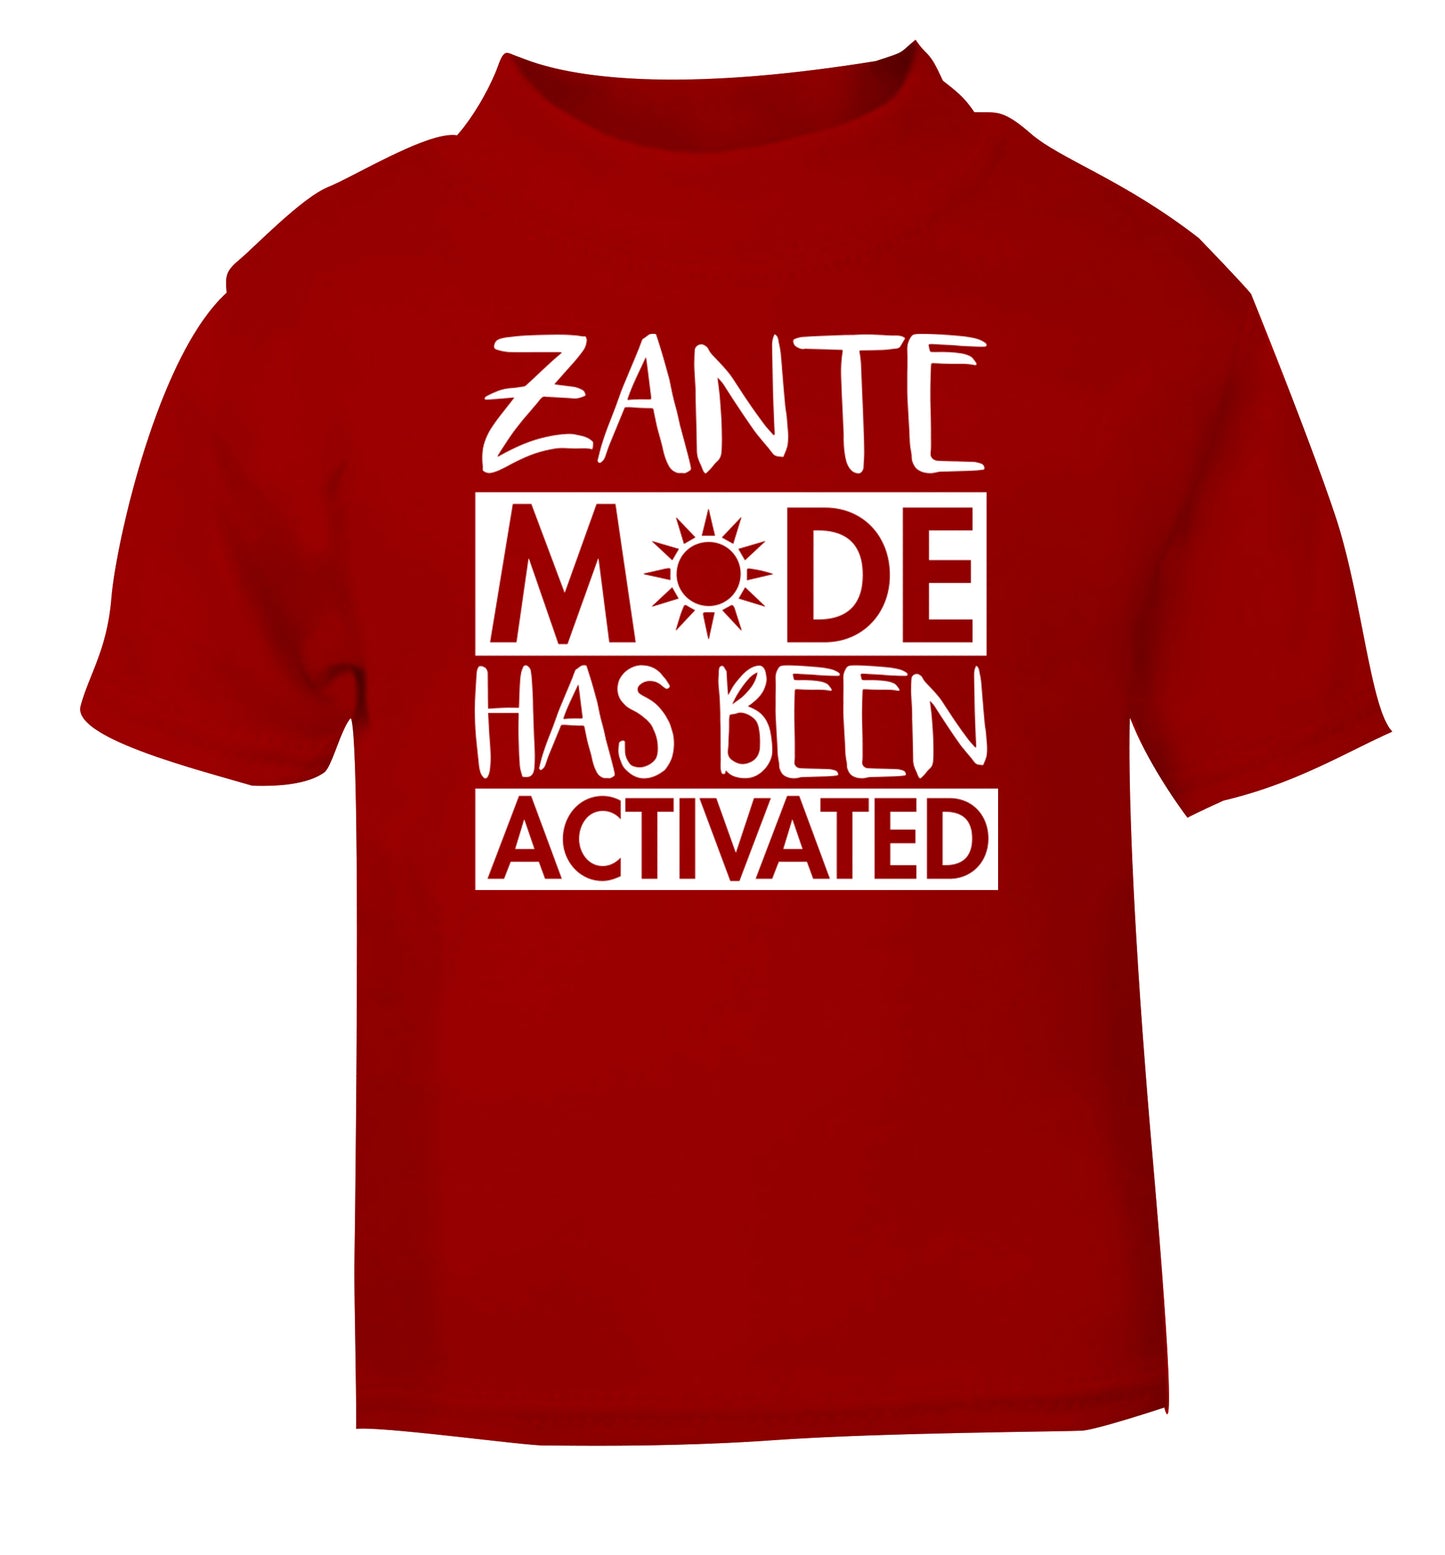 Zante mode has been activated red Baby Toddler Tshirt 2 Years